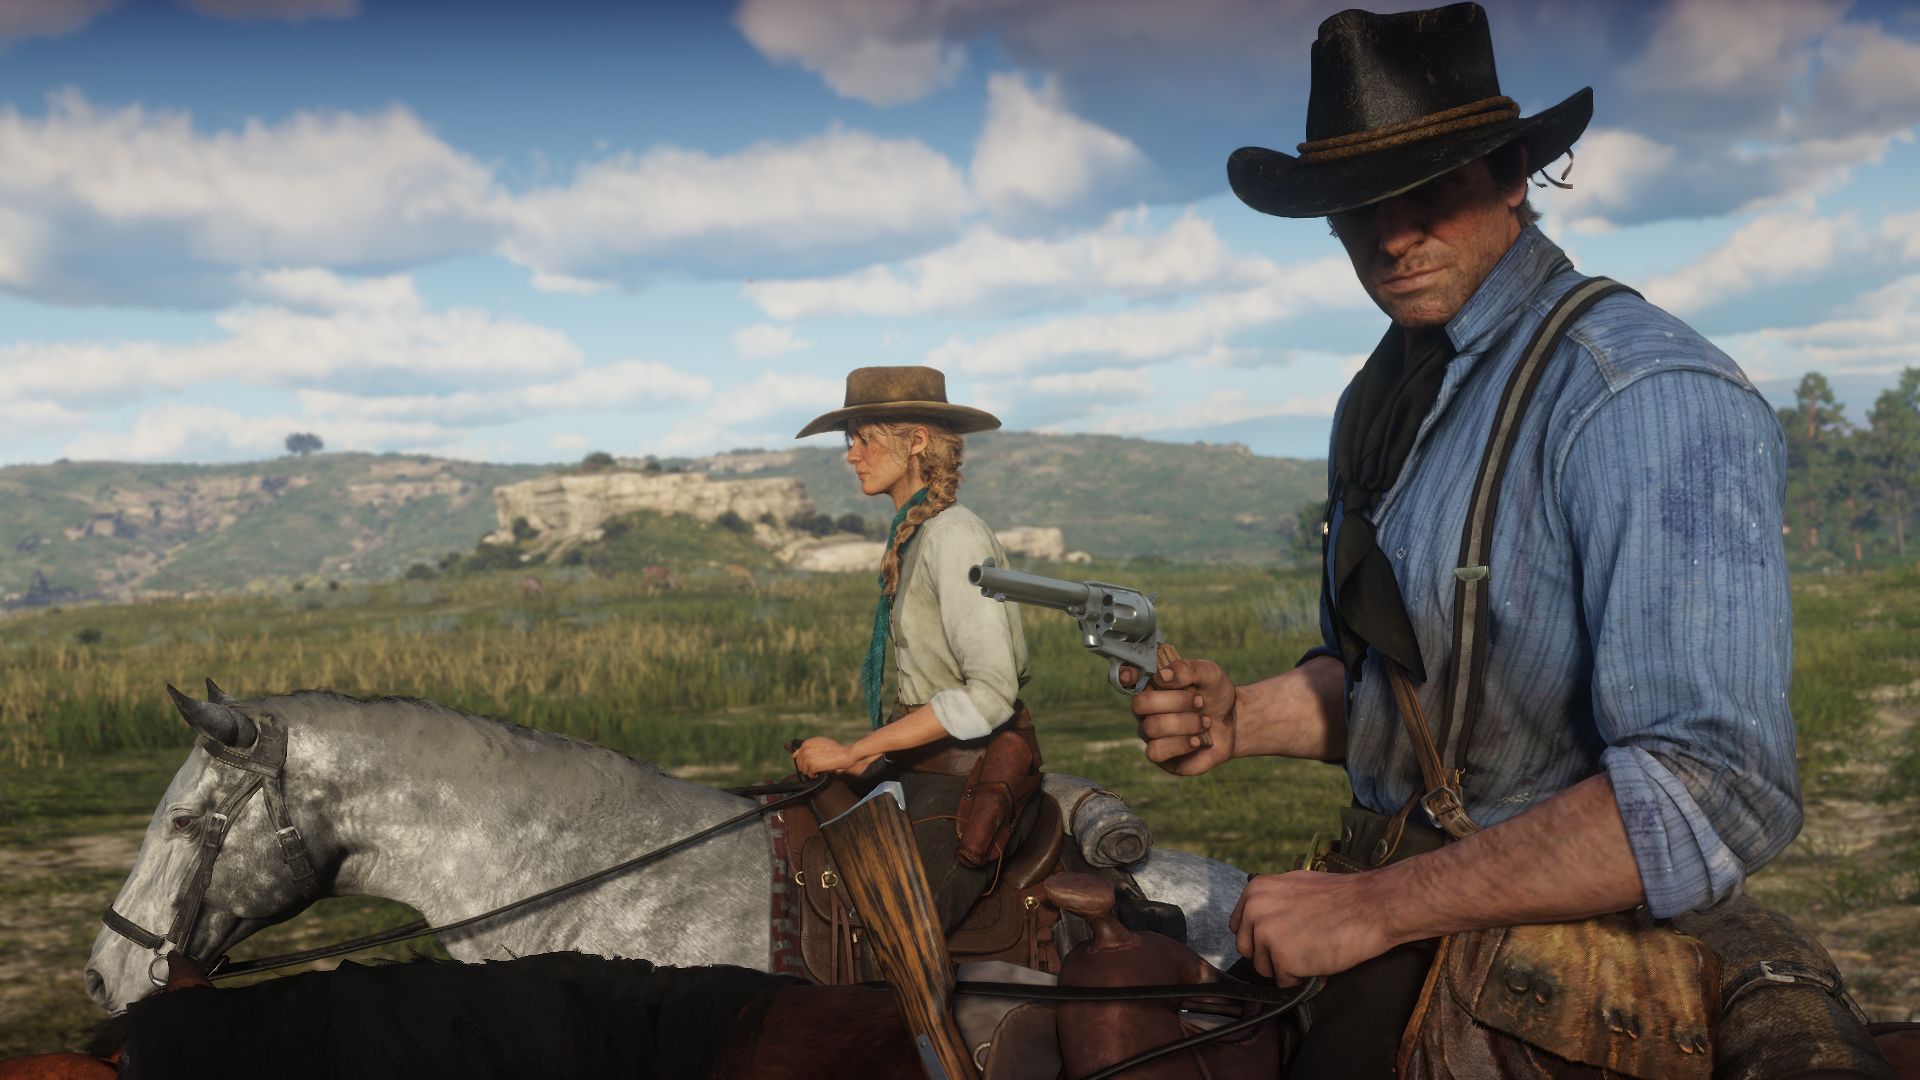 Red Dead Redemption 2 quick money: Guide to get rich